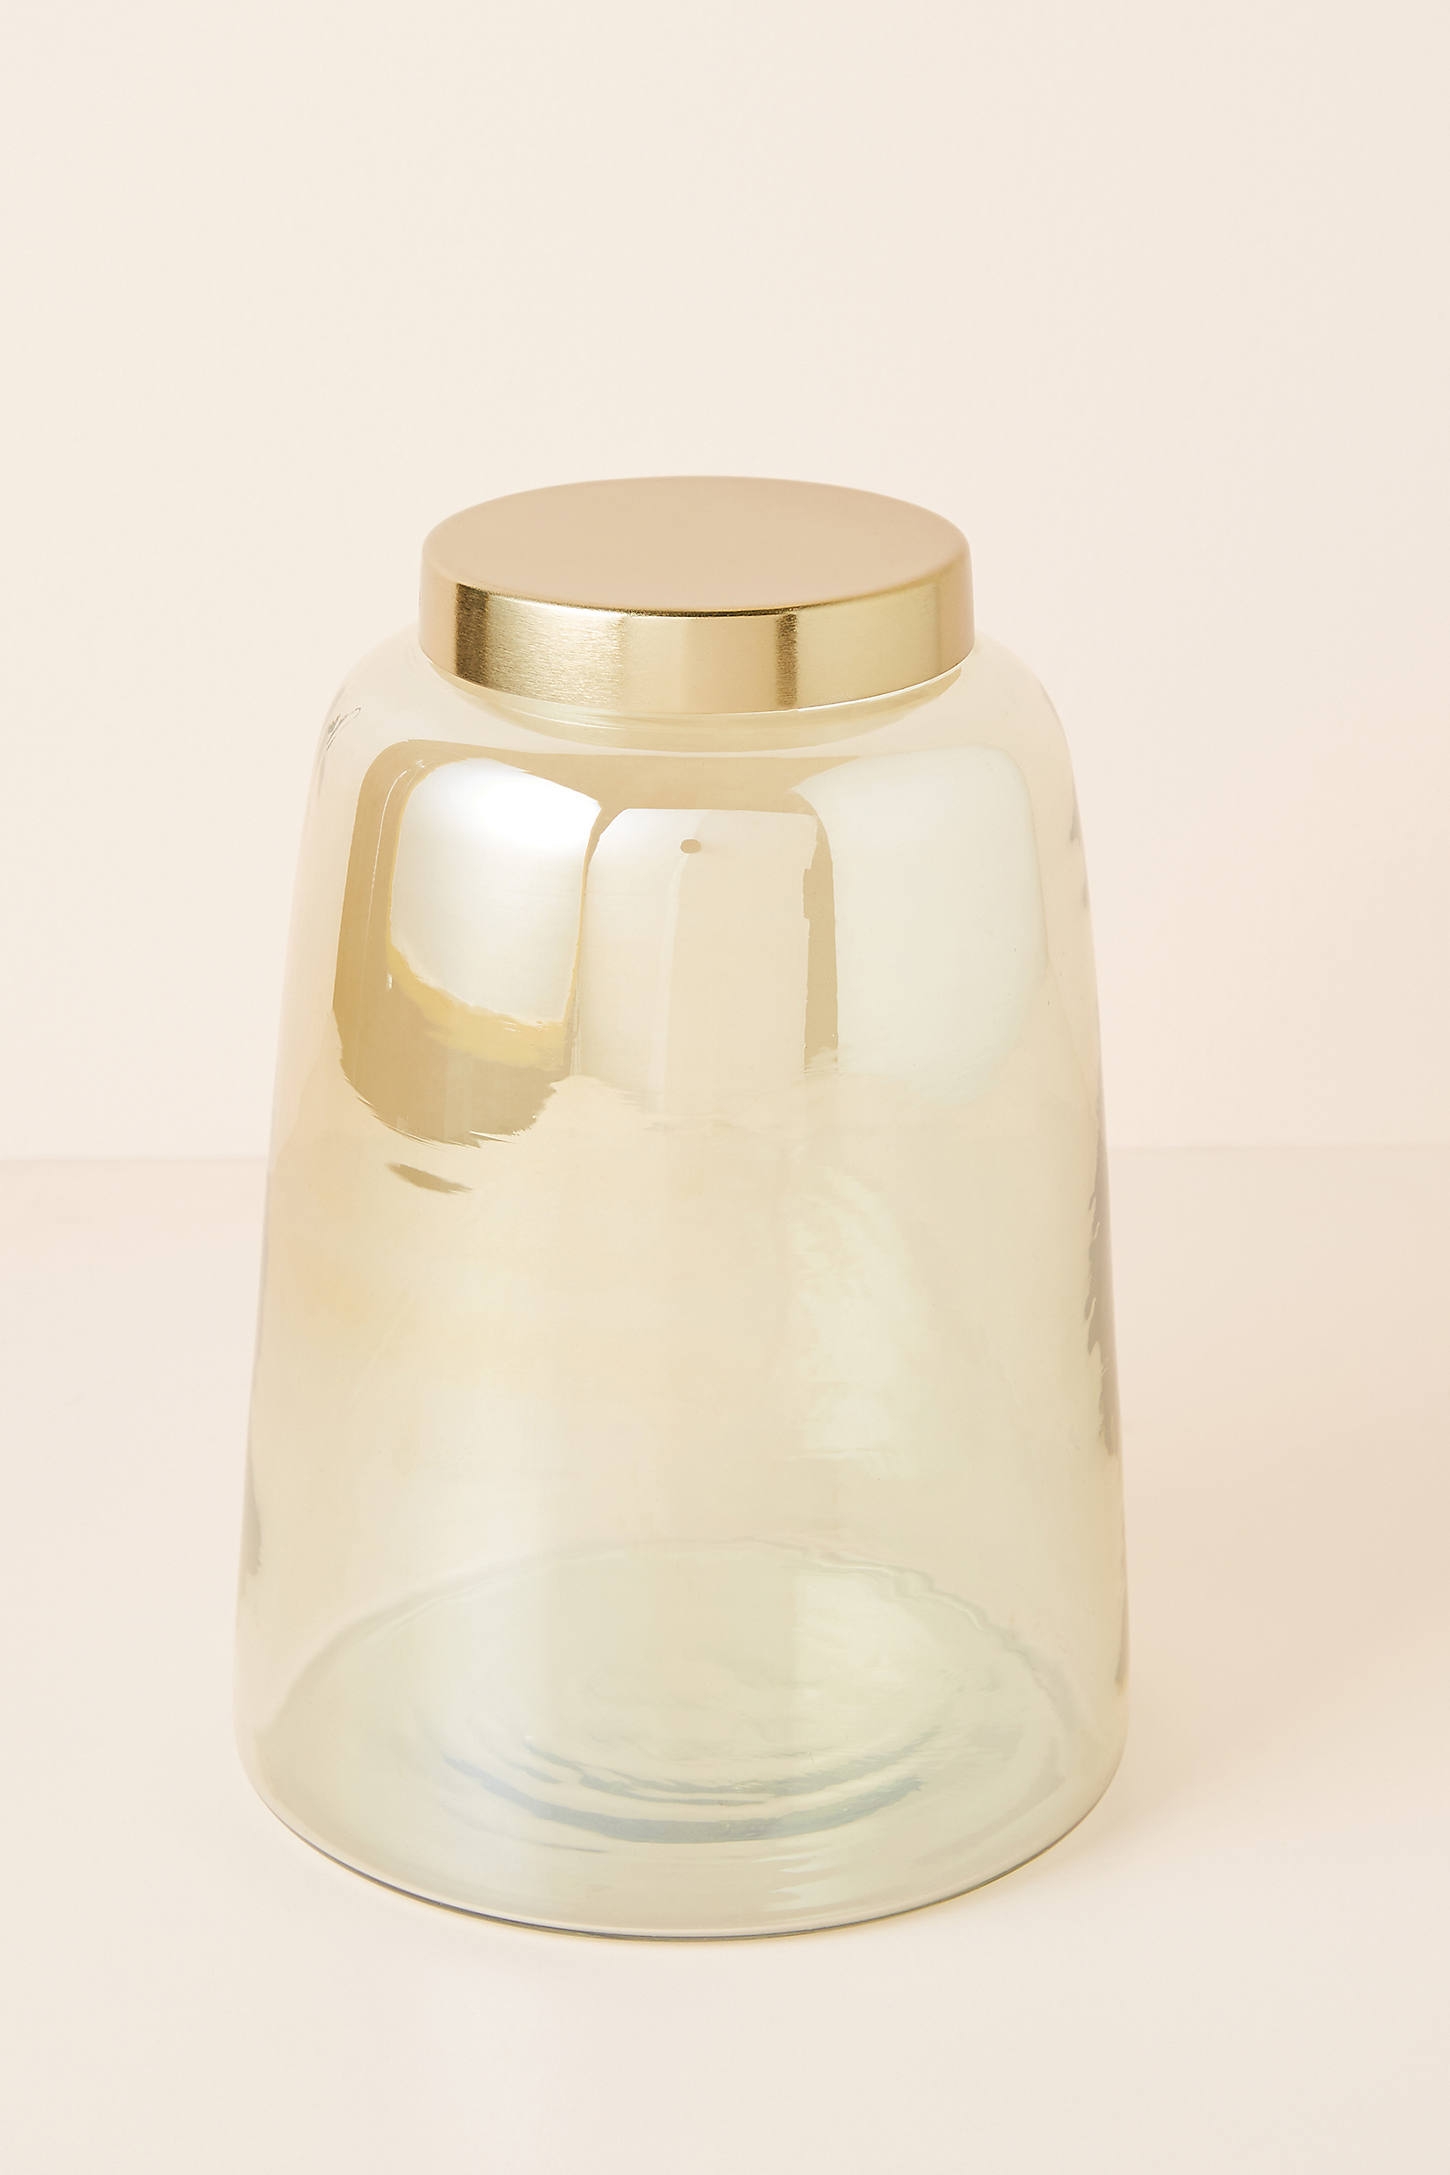 Annabelle Canister-small - Image 0